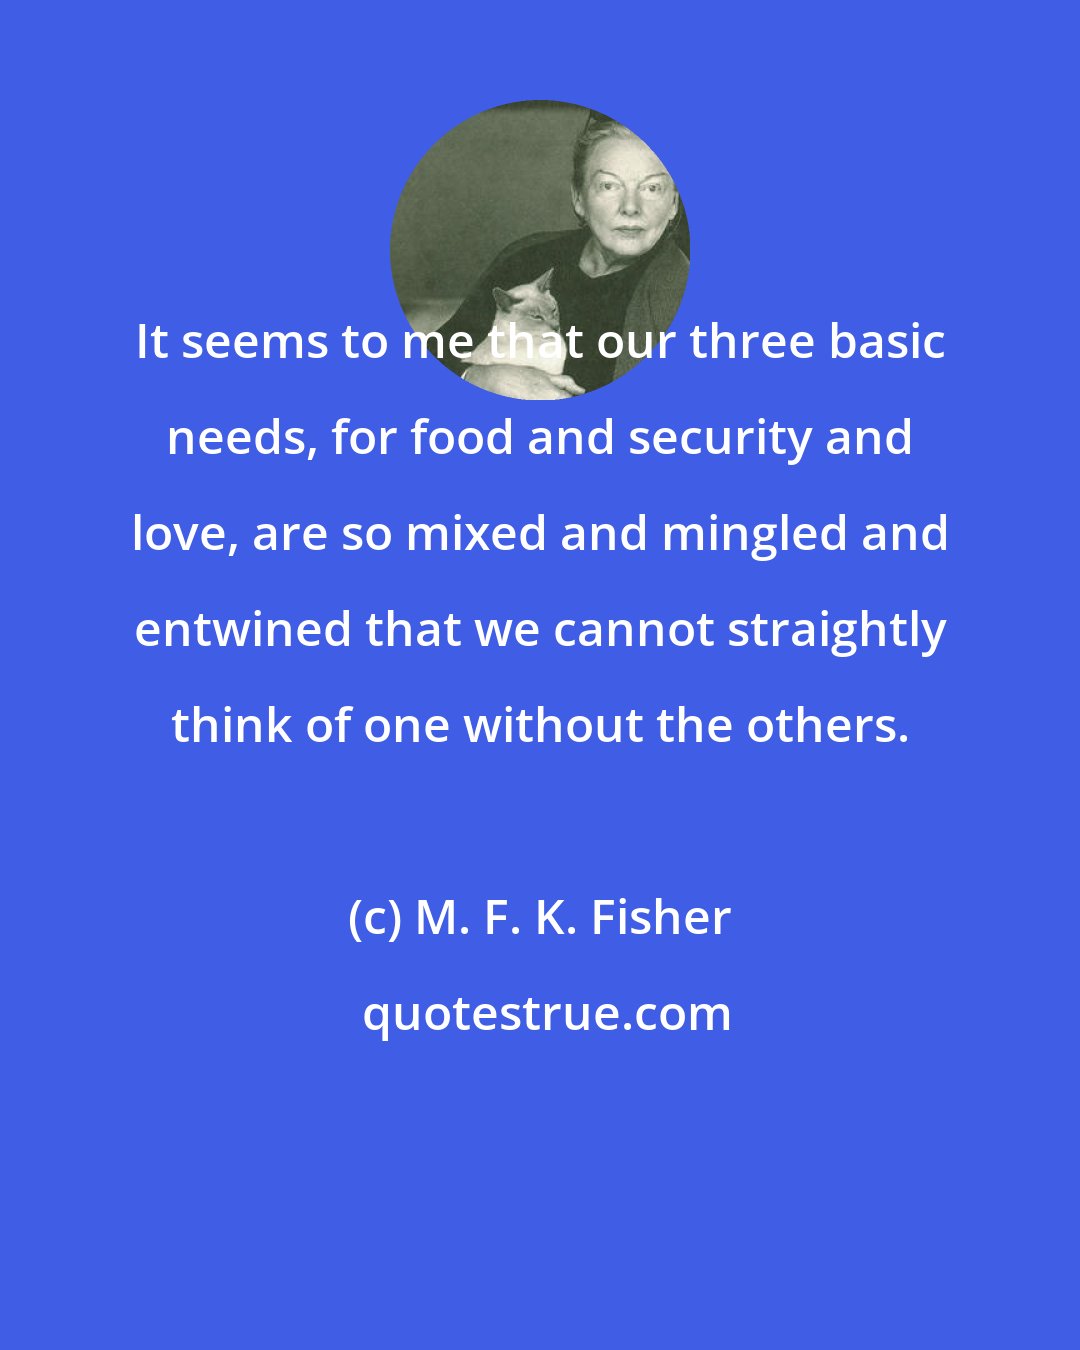 M. F. K. Fisher: It seems to me that our three basic needs, for food and security and love, are so mixed and mingled and entwined that we cannot straightly think of one without the others.